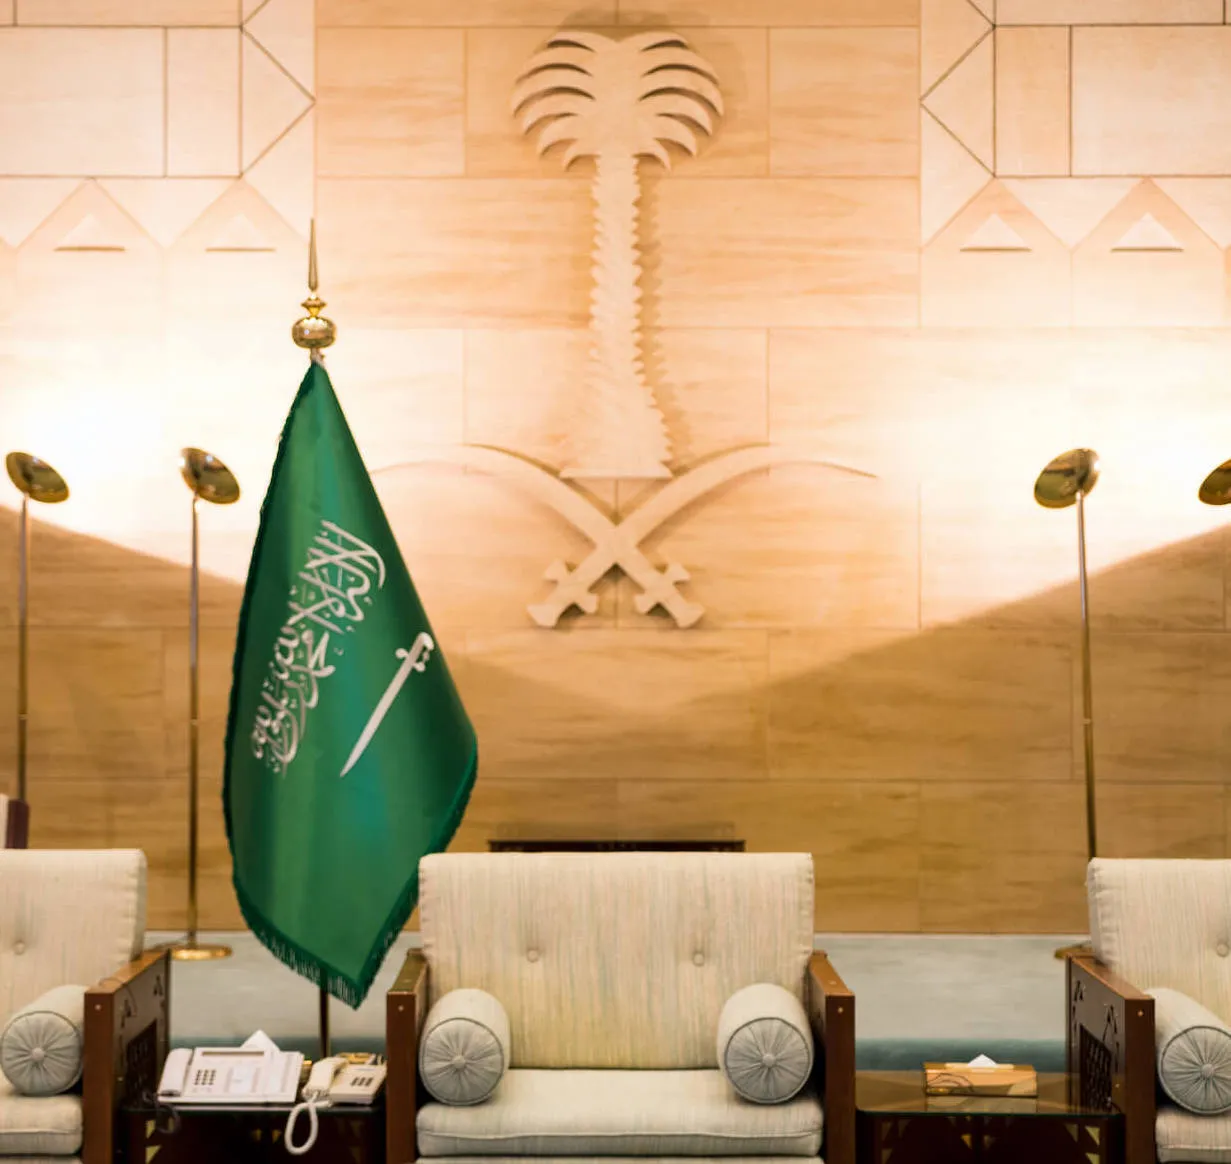 Royal Standard in Saudi government entry hall